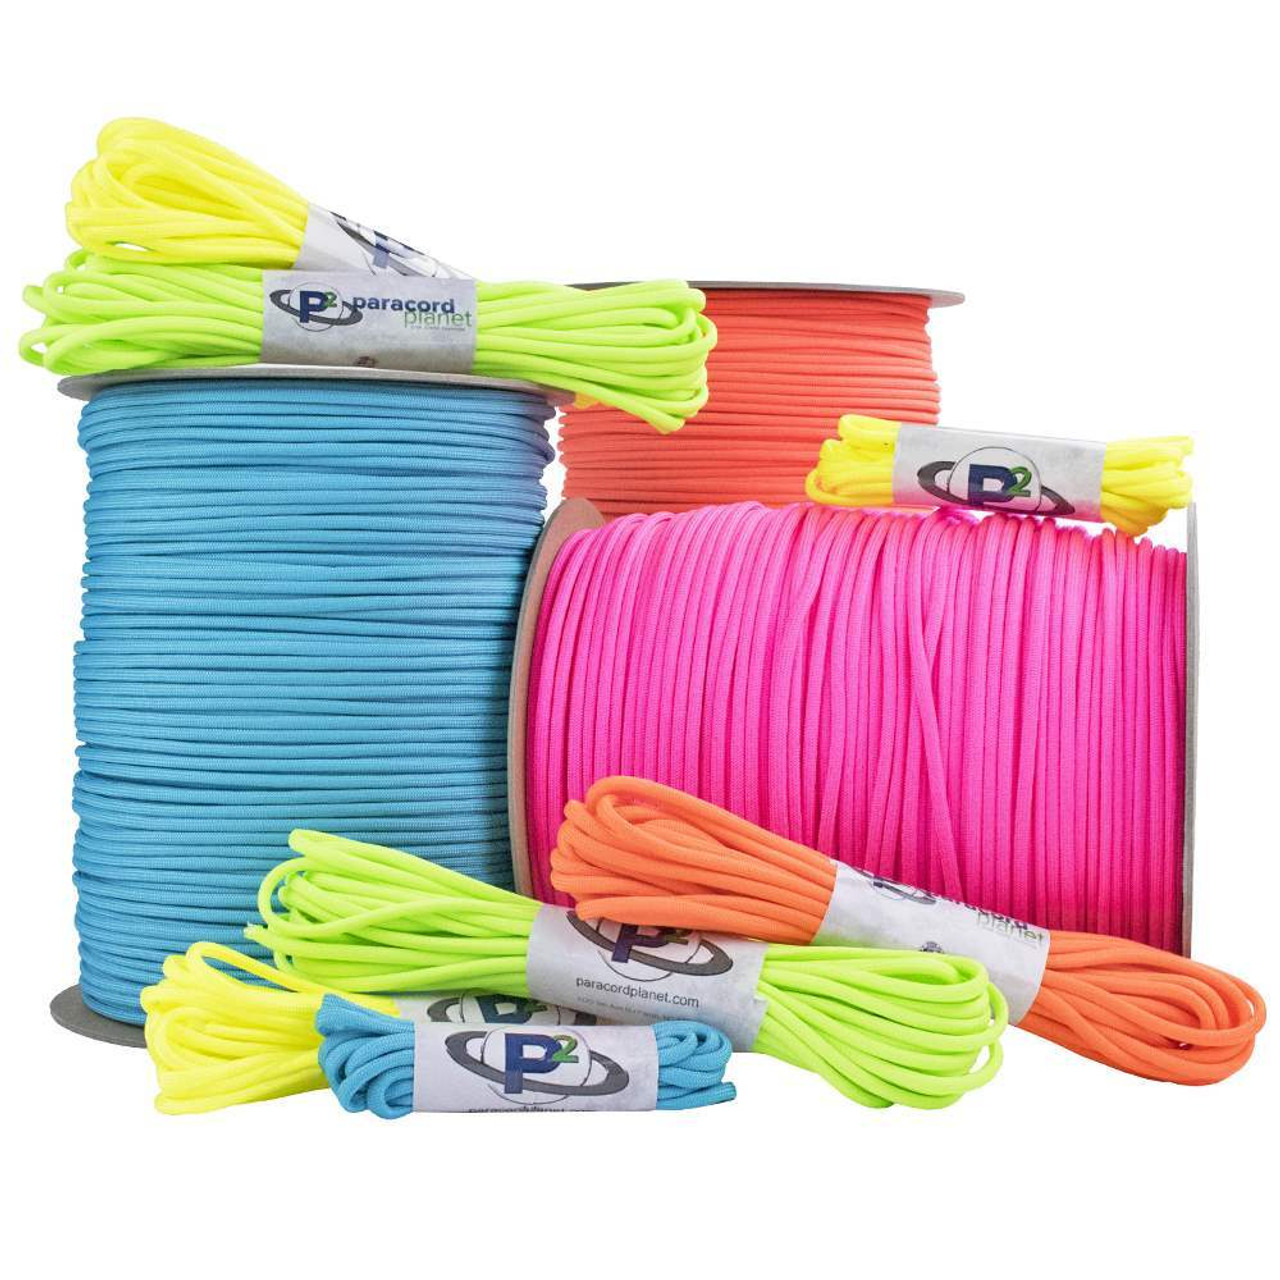 GOLBERG MIL Spec 750 Paracord with Spool Tool - 50 Feet - Variety of Color  Options 